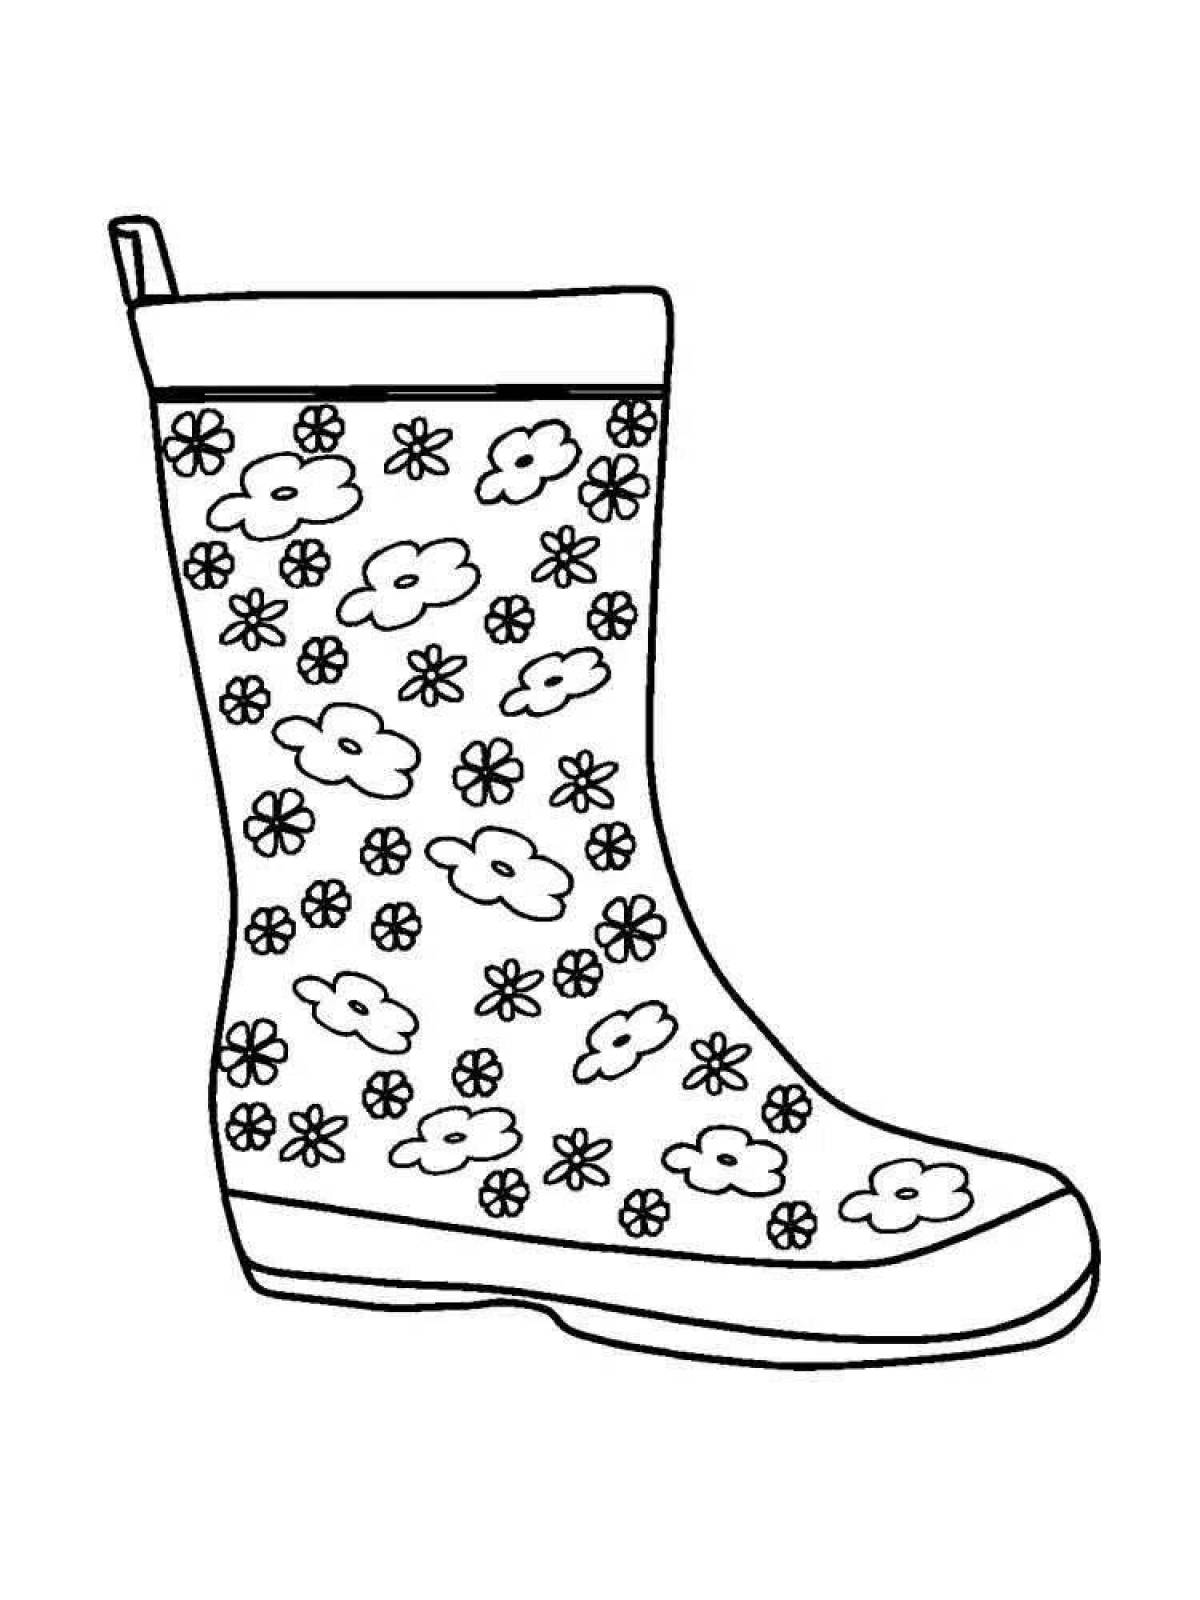 Outstanding boots coloring book for kids